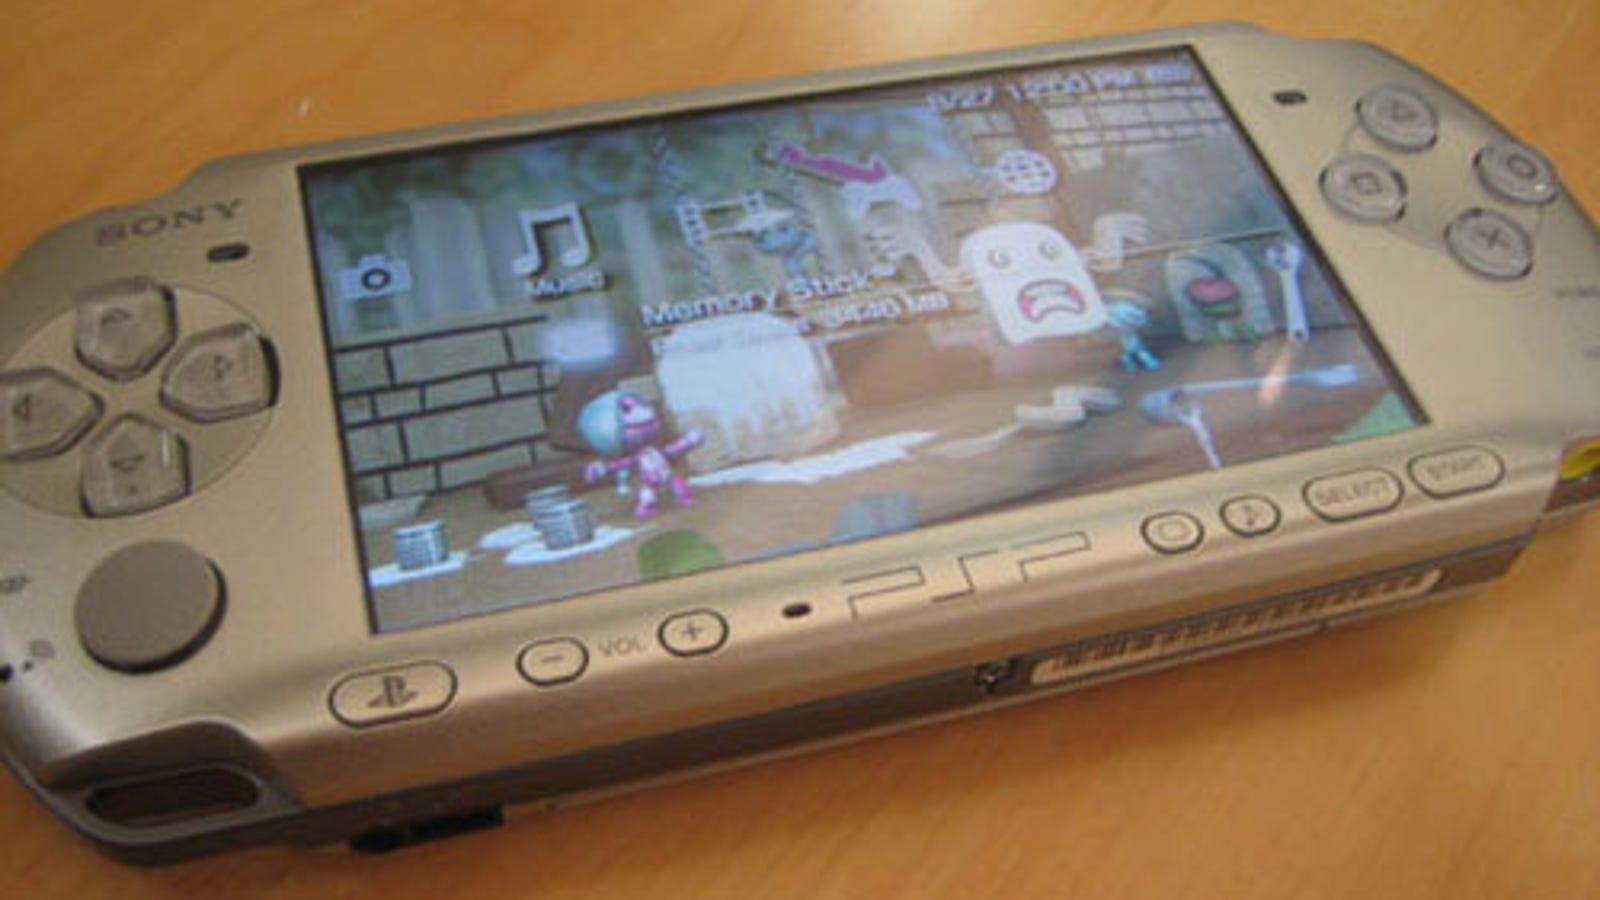 The PSP 3000 - How Different Is It?